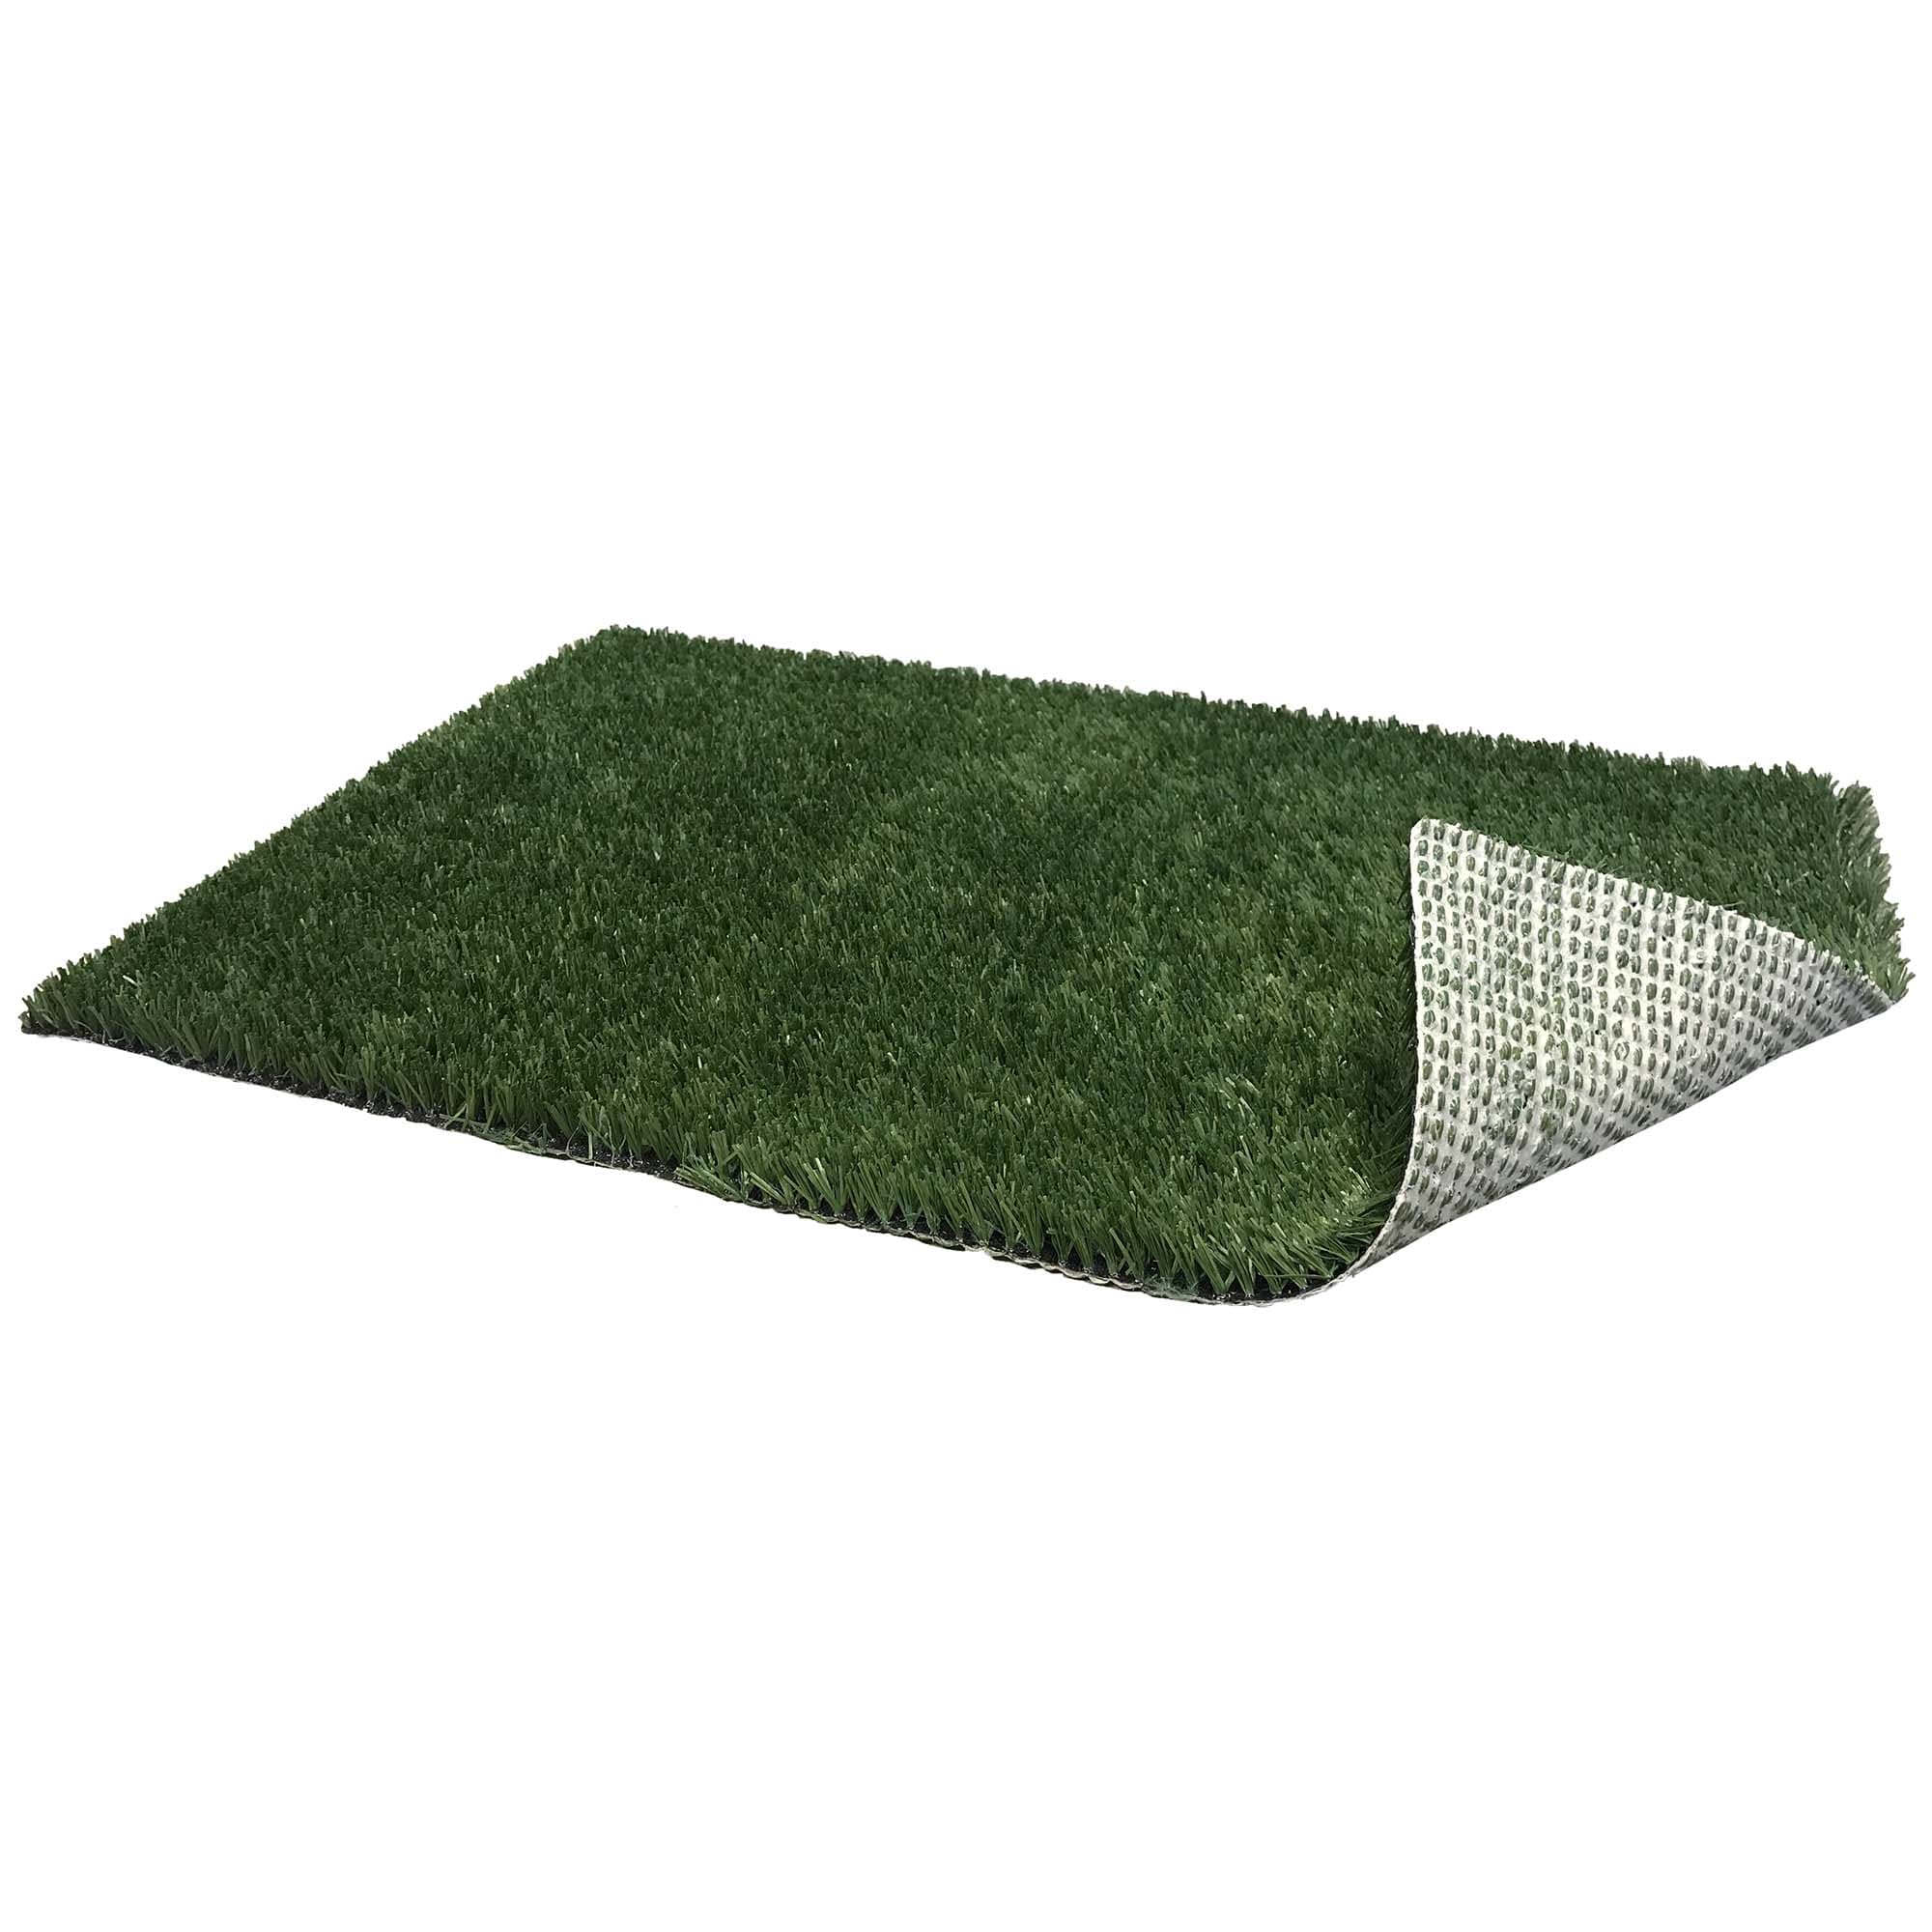 Photos - Aquarium Lighting PoochPads PoochPads Indoor Dog Potty Replacement Grass, 23" L X 15" W X .5